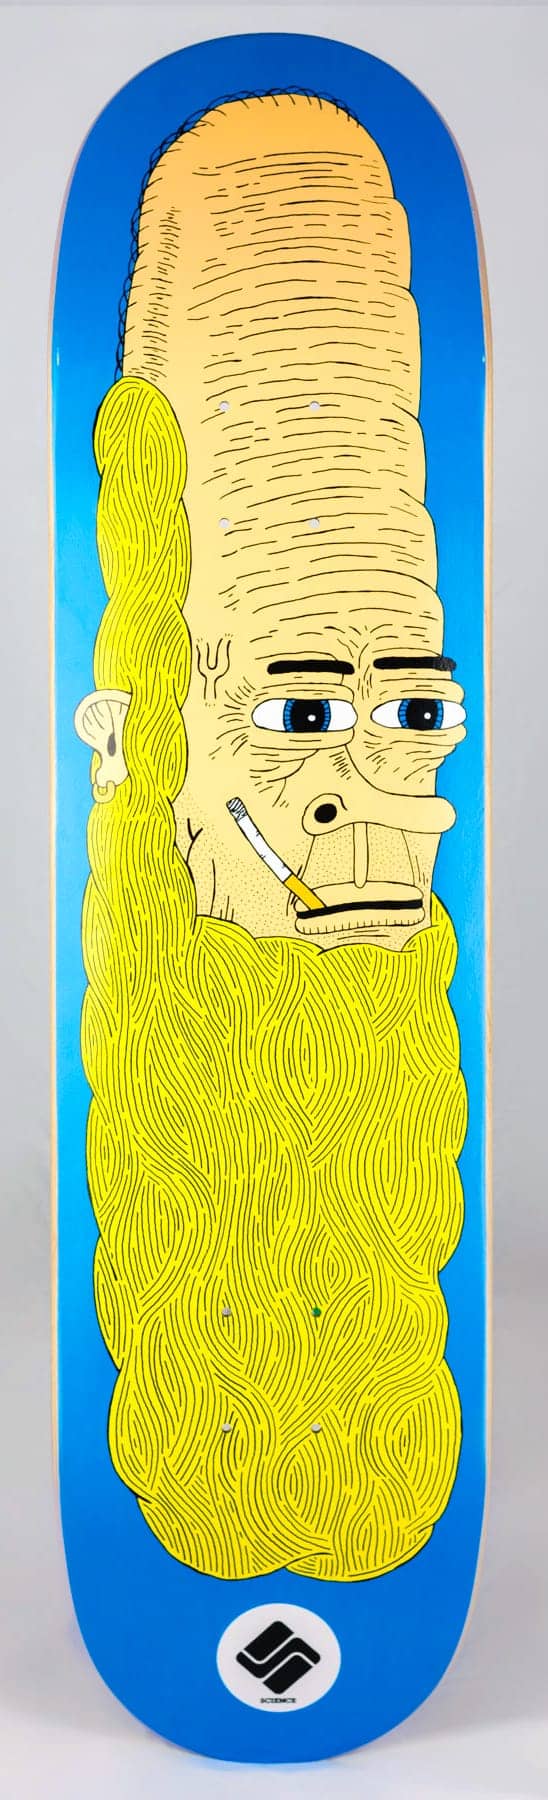 sam taylor illustrator god when he was young skateboard graphic